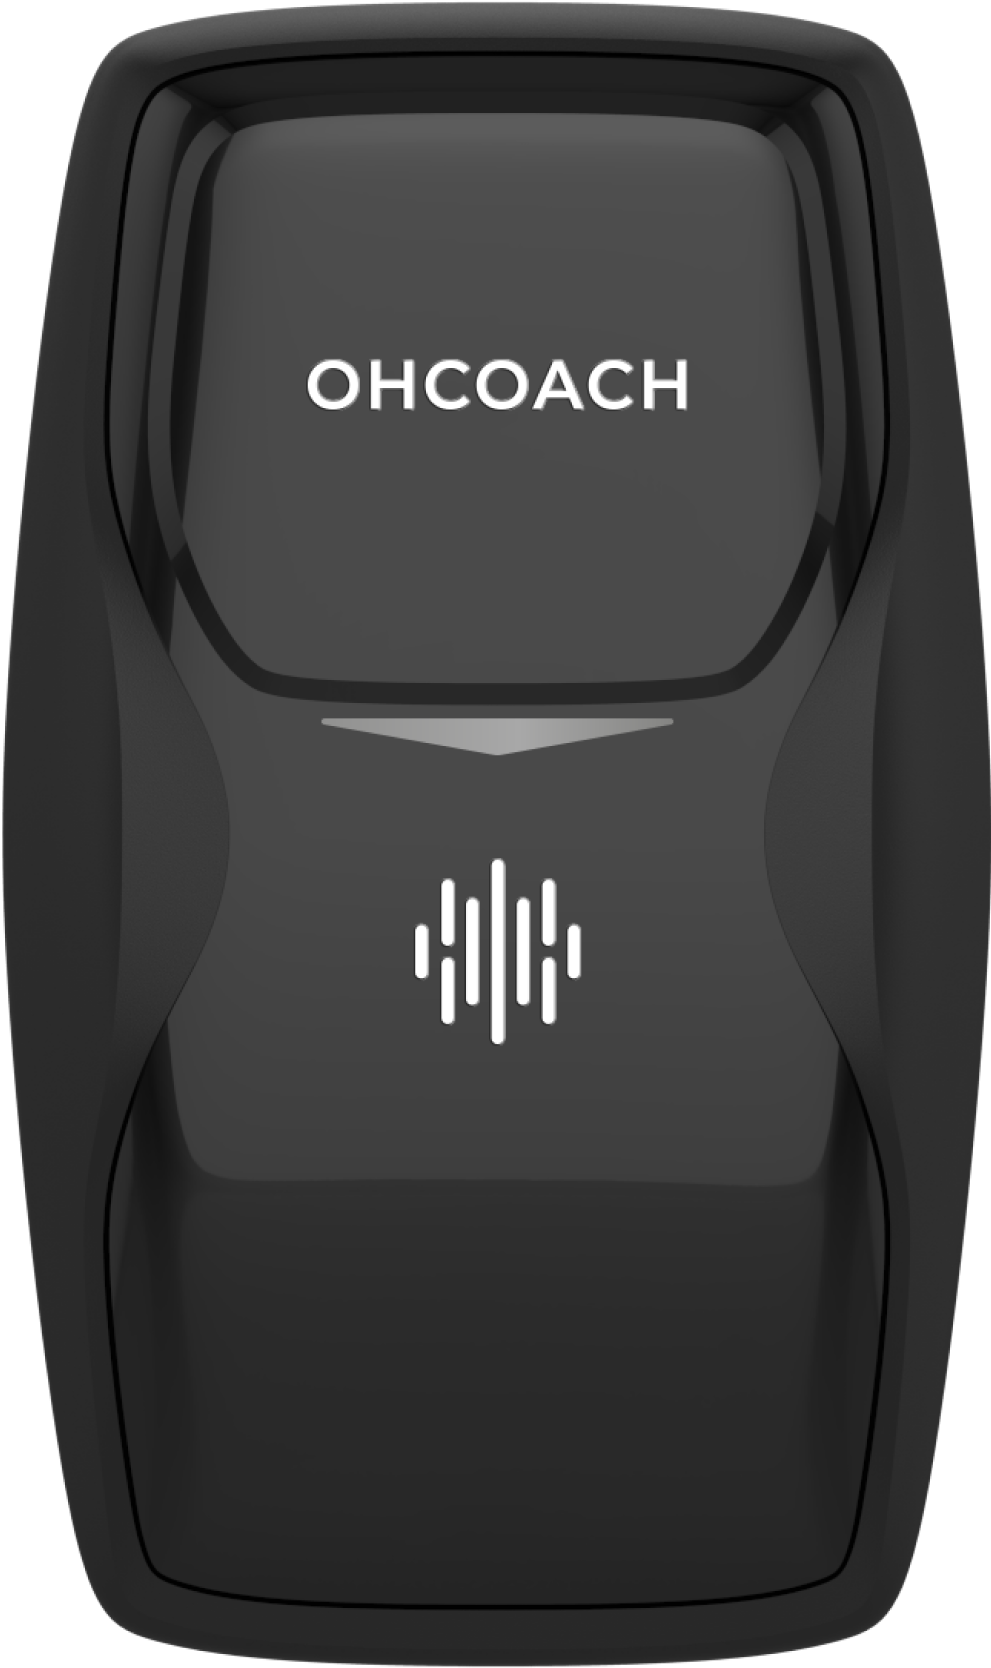 Wearable GPS _EPTS_ _ OHCOACH by Fitogether